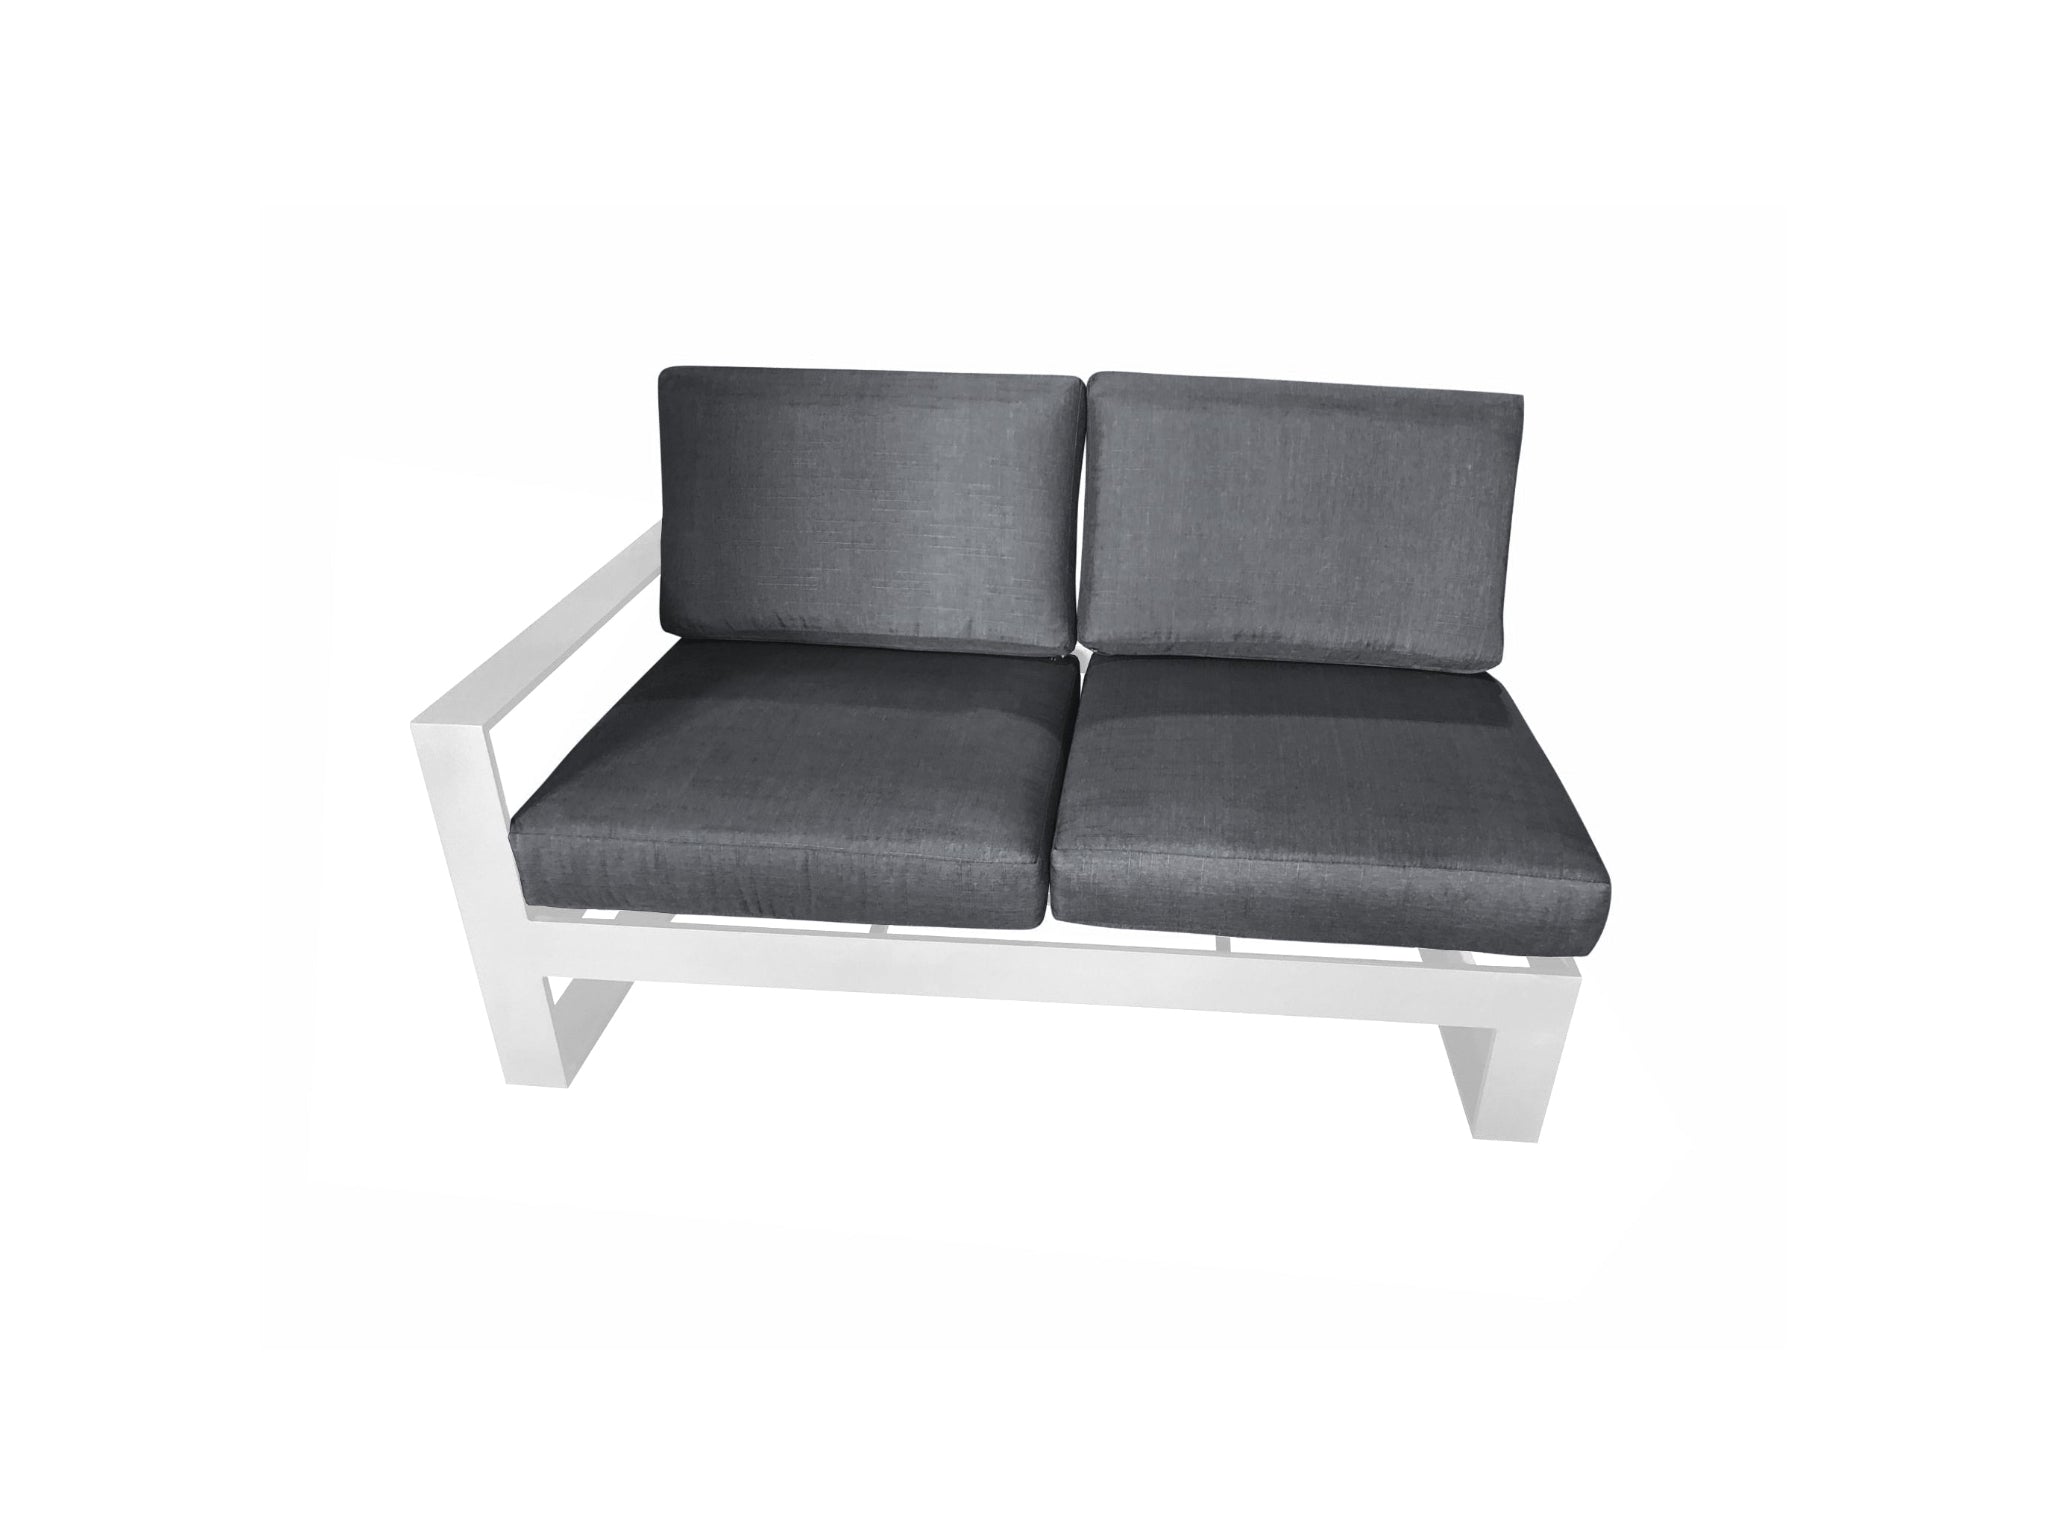 Sunlongarden Manly 2-Seat Right Side Sofa